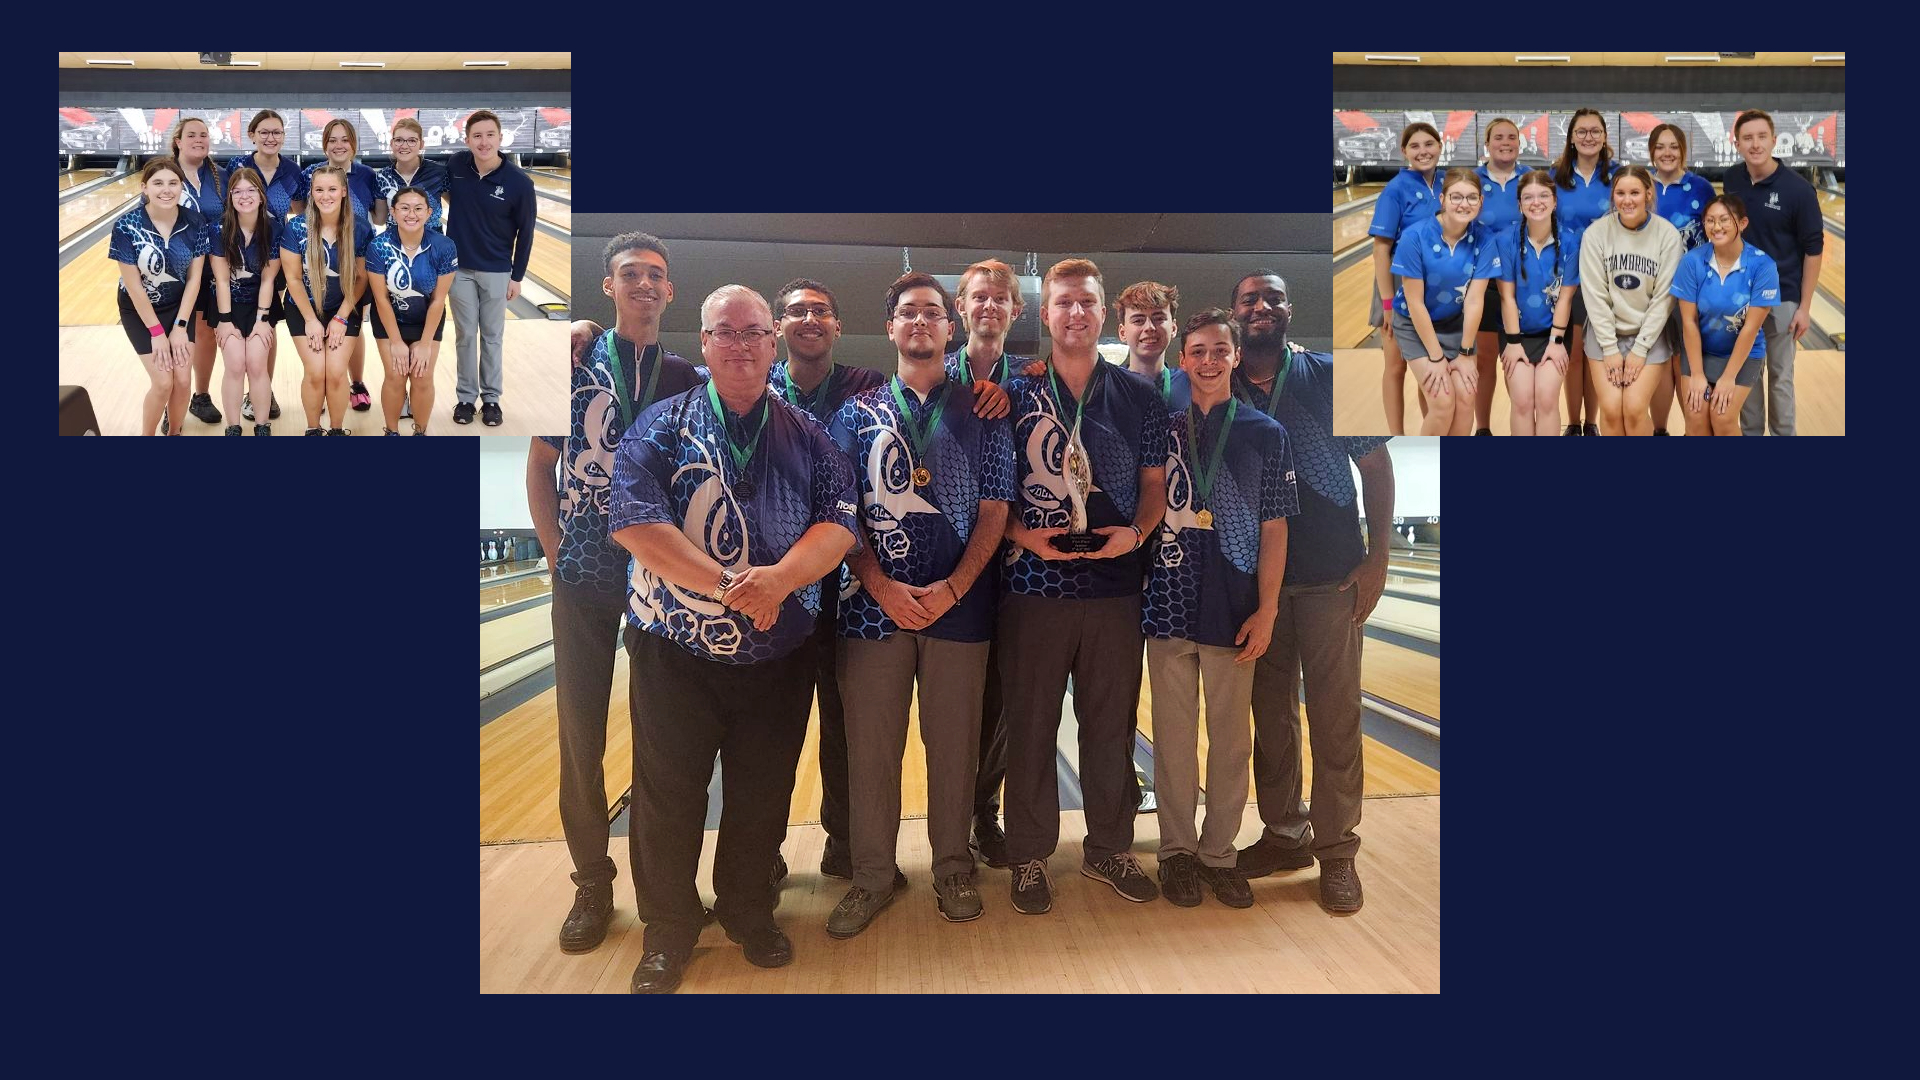 Men bring home Midwest Collegiate Championships crown